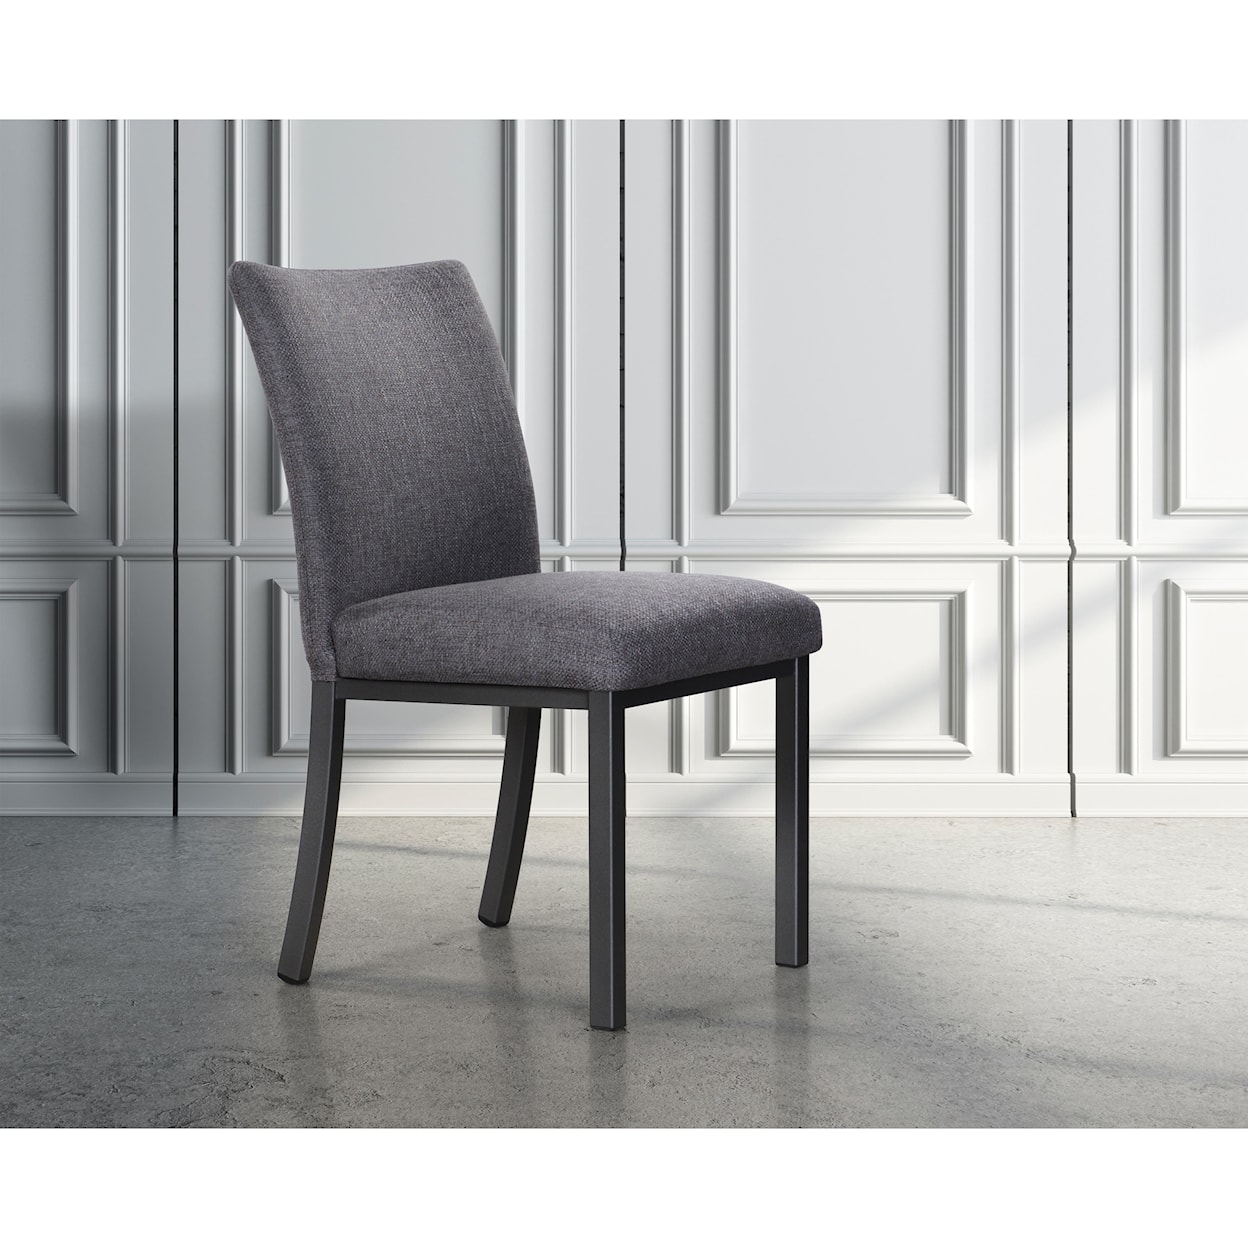 Trica Contemporary Seating Biscaro Plus Side Chair